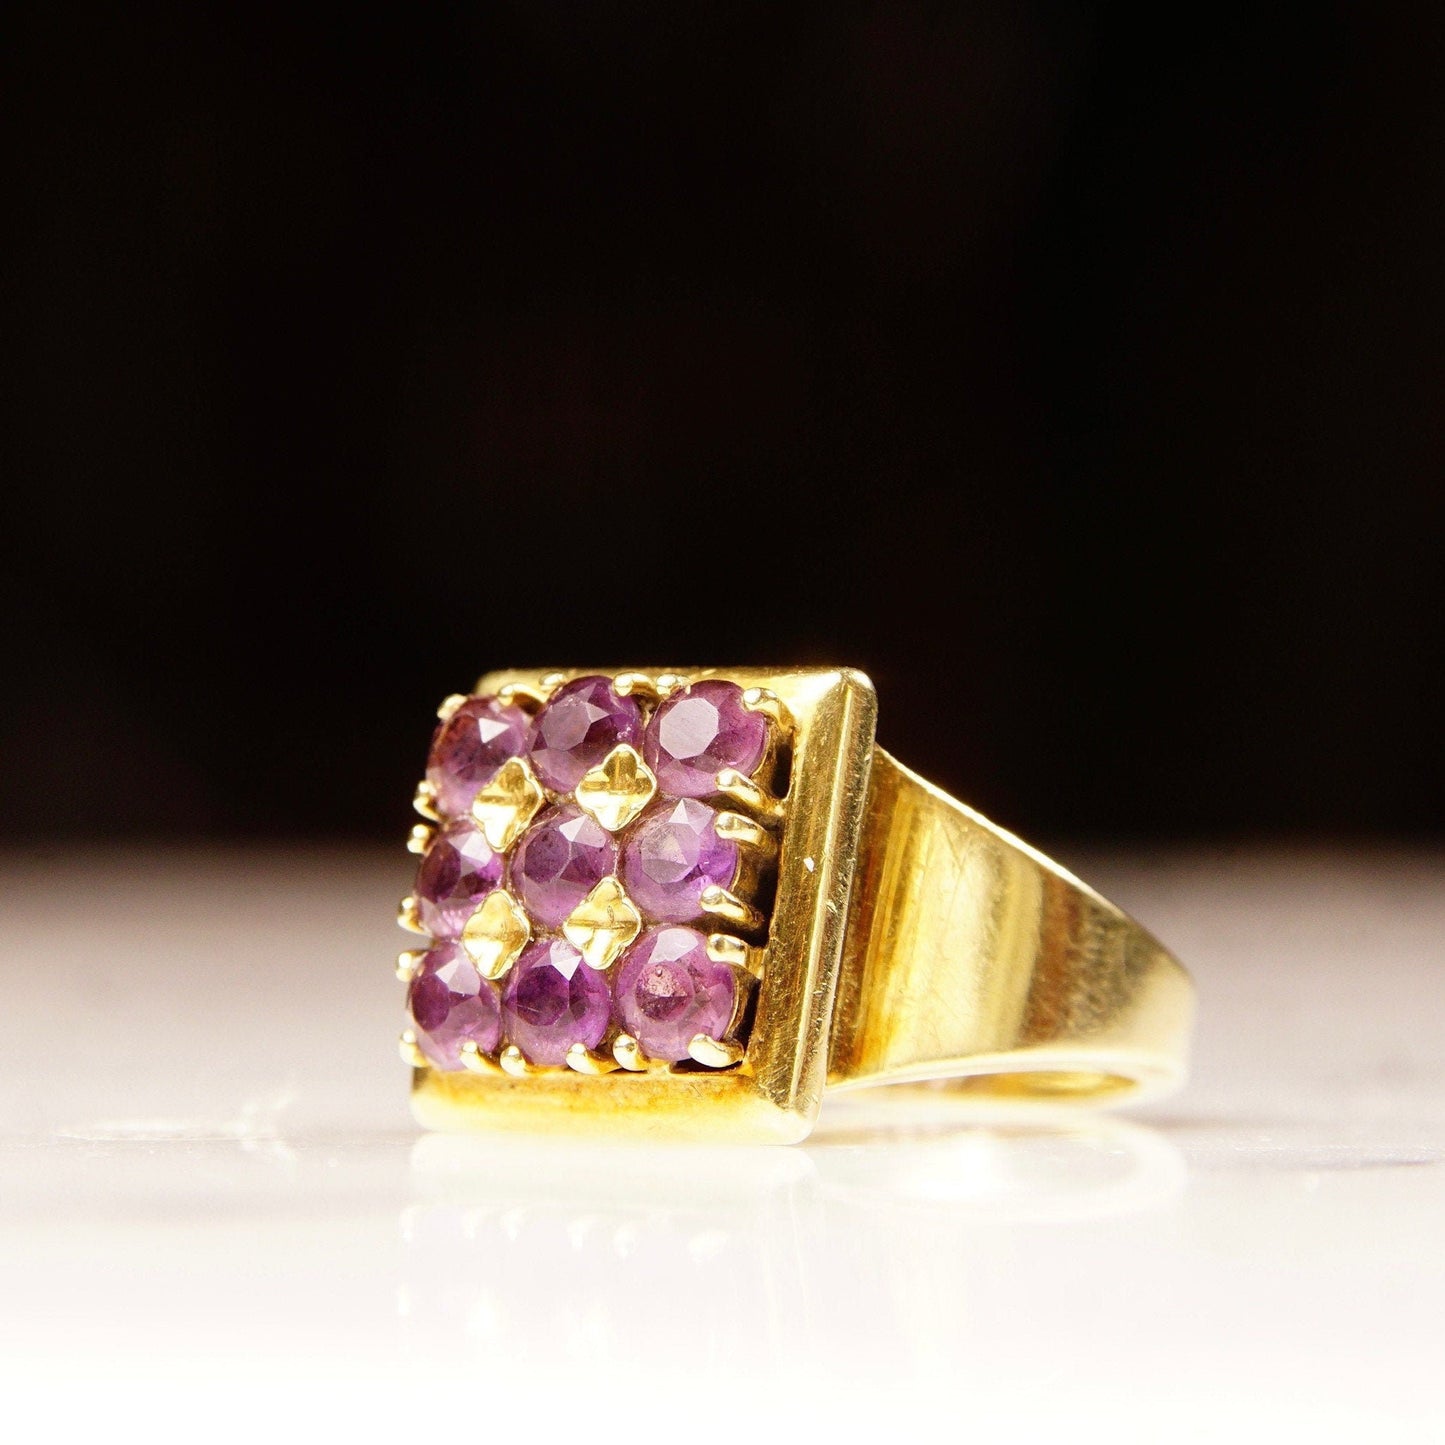 Modernist 14K Amethyst Cluster Ring, Men's Style Square-Top Ring Face, 9 Round-Cut Stones, Size 8 US - Good's Vintage